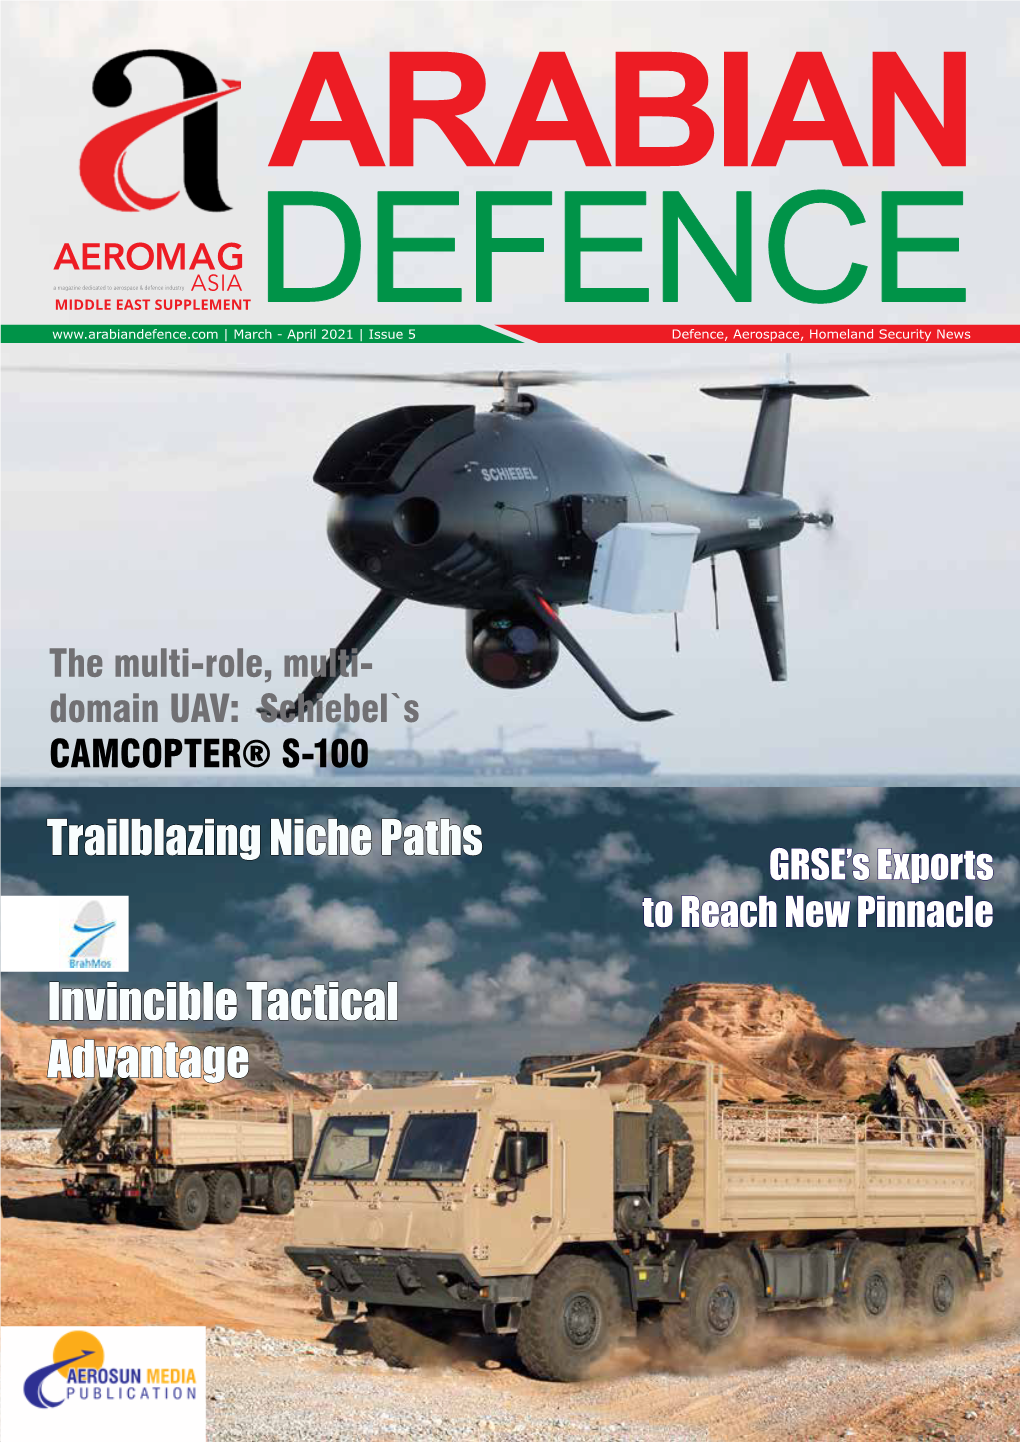 Invincible Tactical Advantage 2 MULTI-ROLEMULTI-ROLE MULTI-DOMAINMULTI-DOMAIN CAMCOPTER ® S-100 UNMANNED AIR SYSTEM